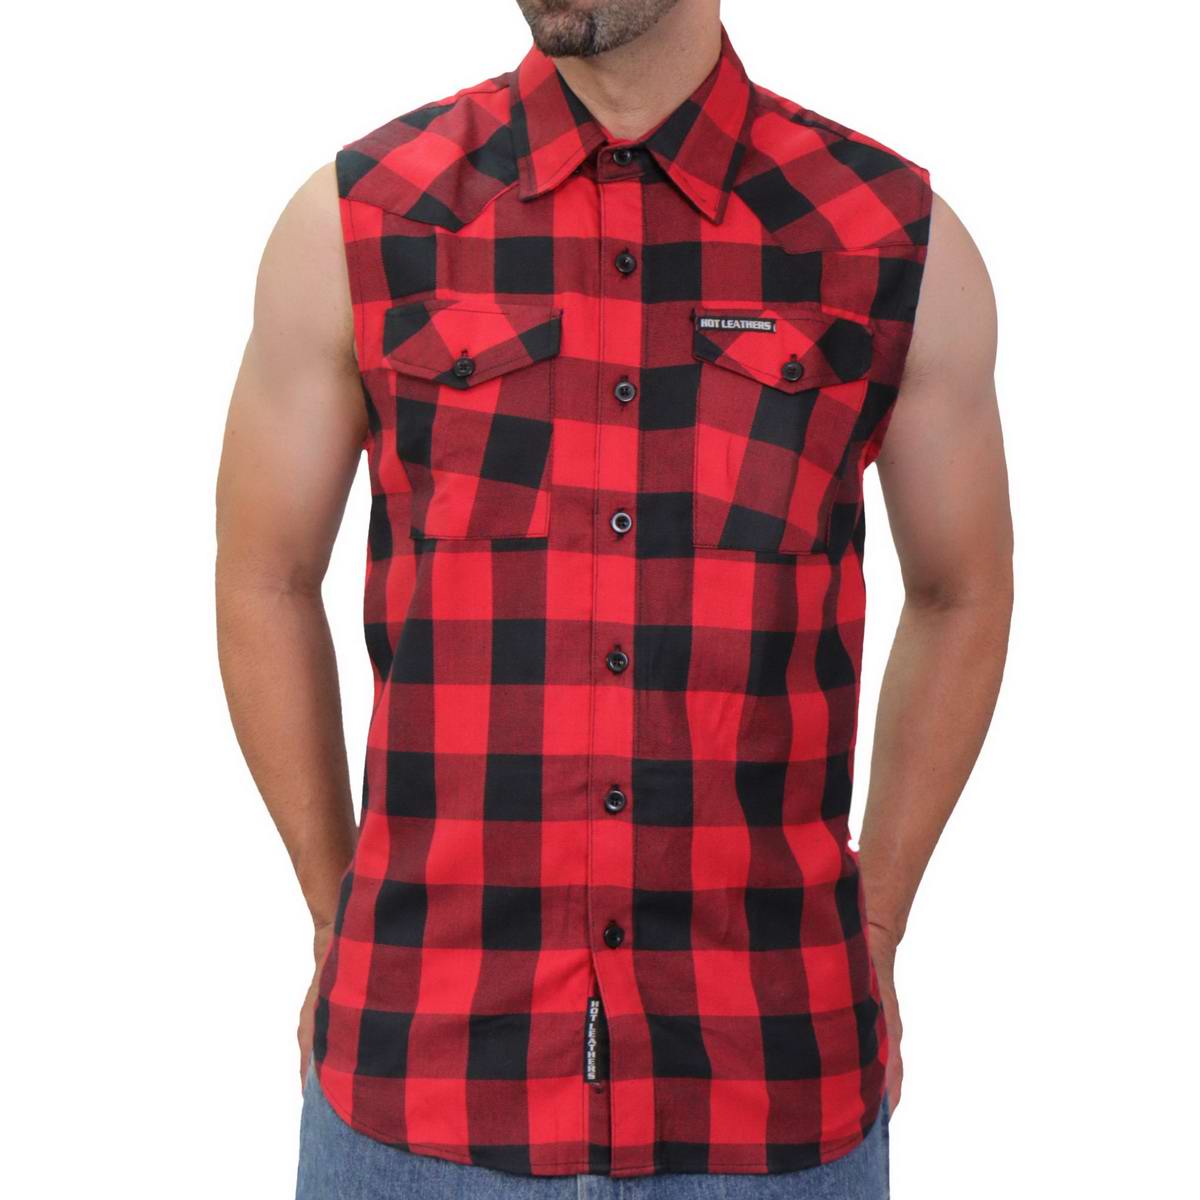 Hot Leathers GMS3491 Men’s Black and Red Patriot Skull Sleeveless Flannel Shirt